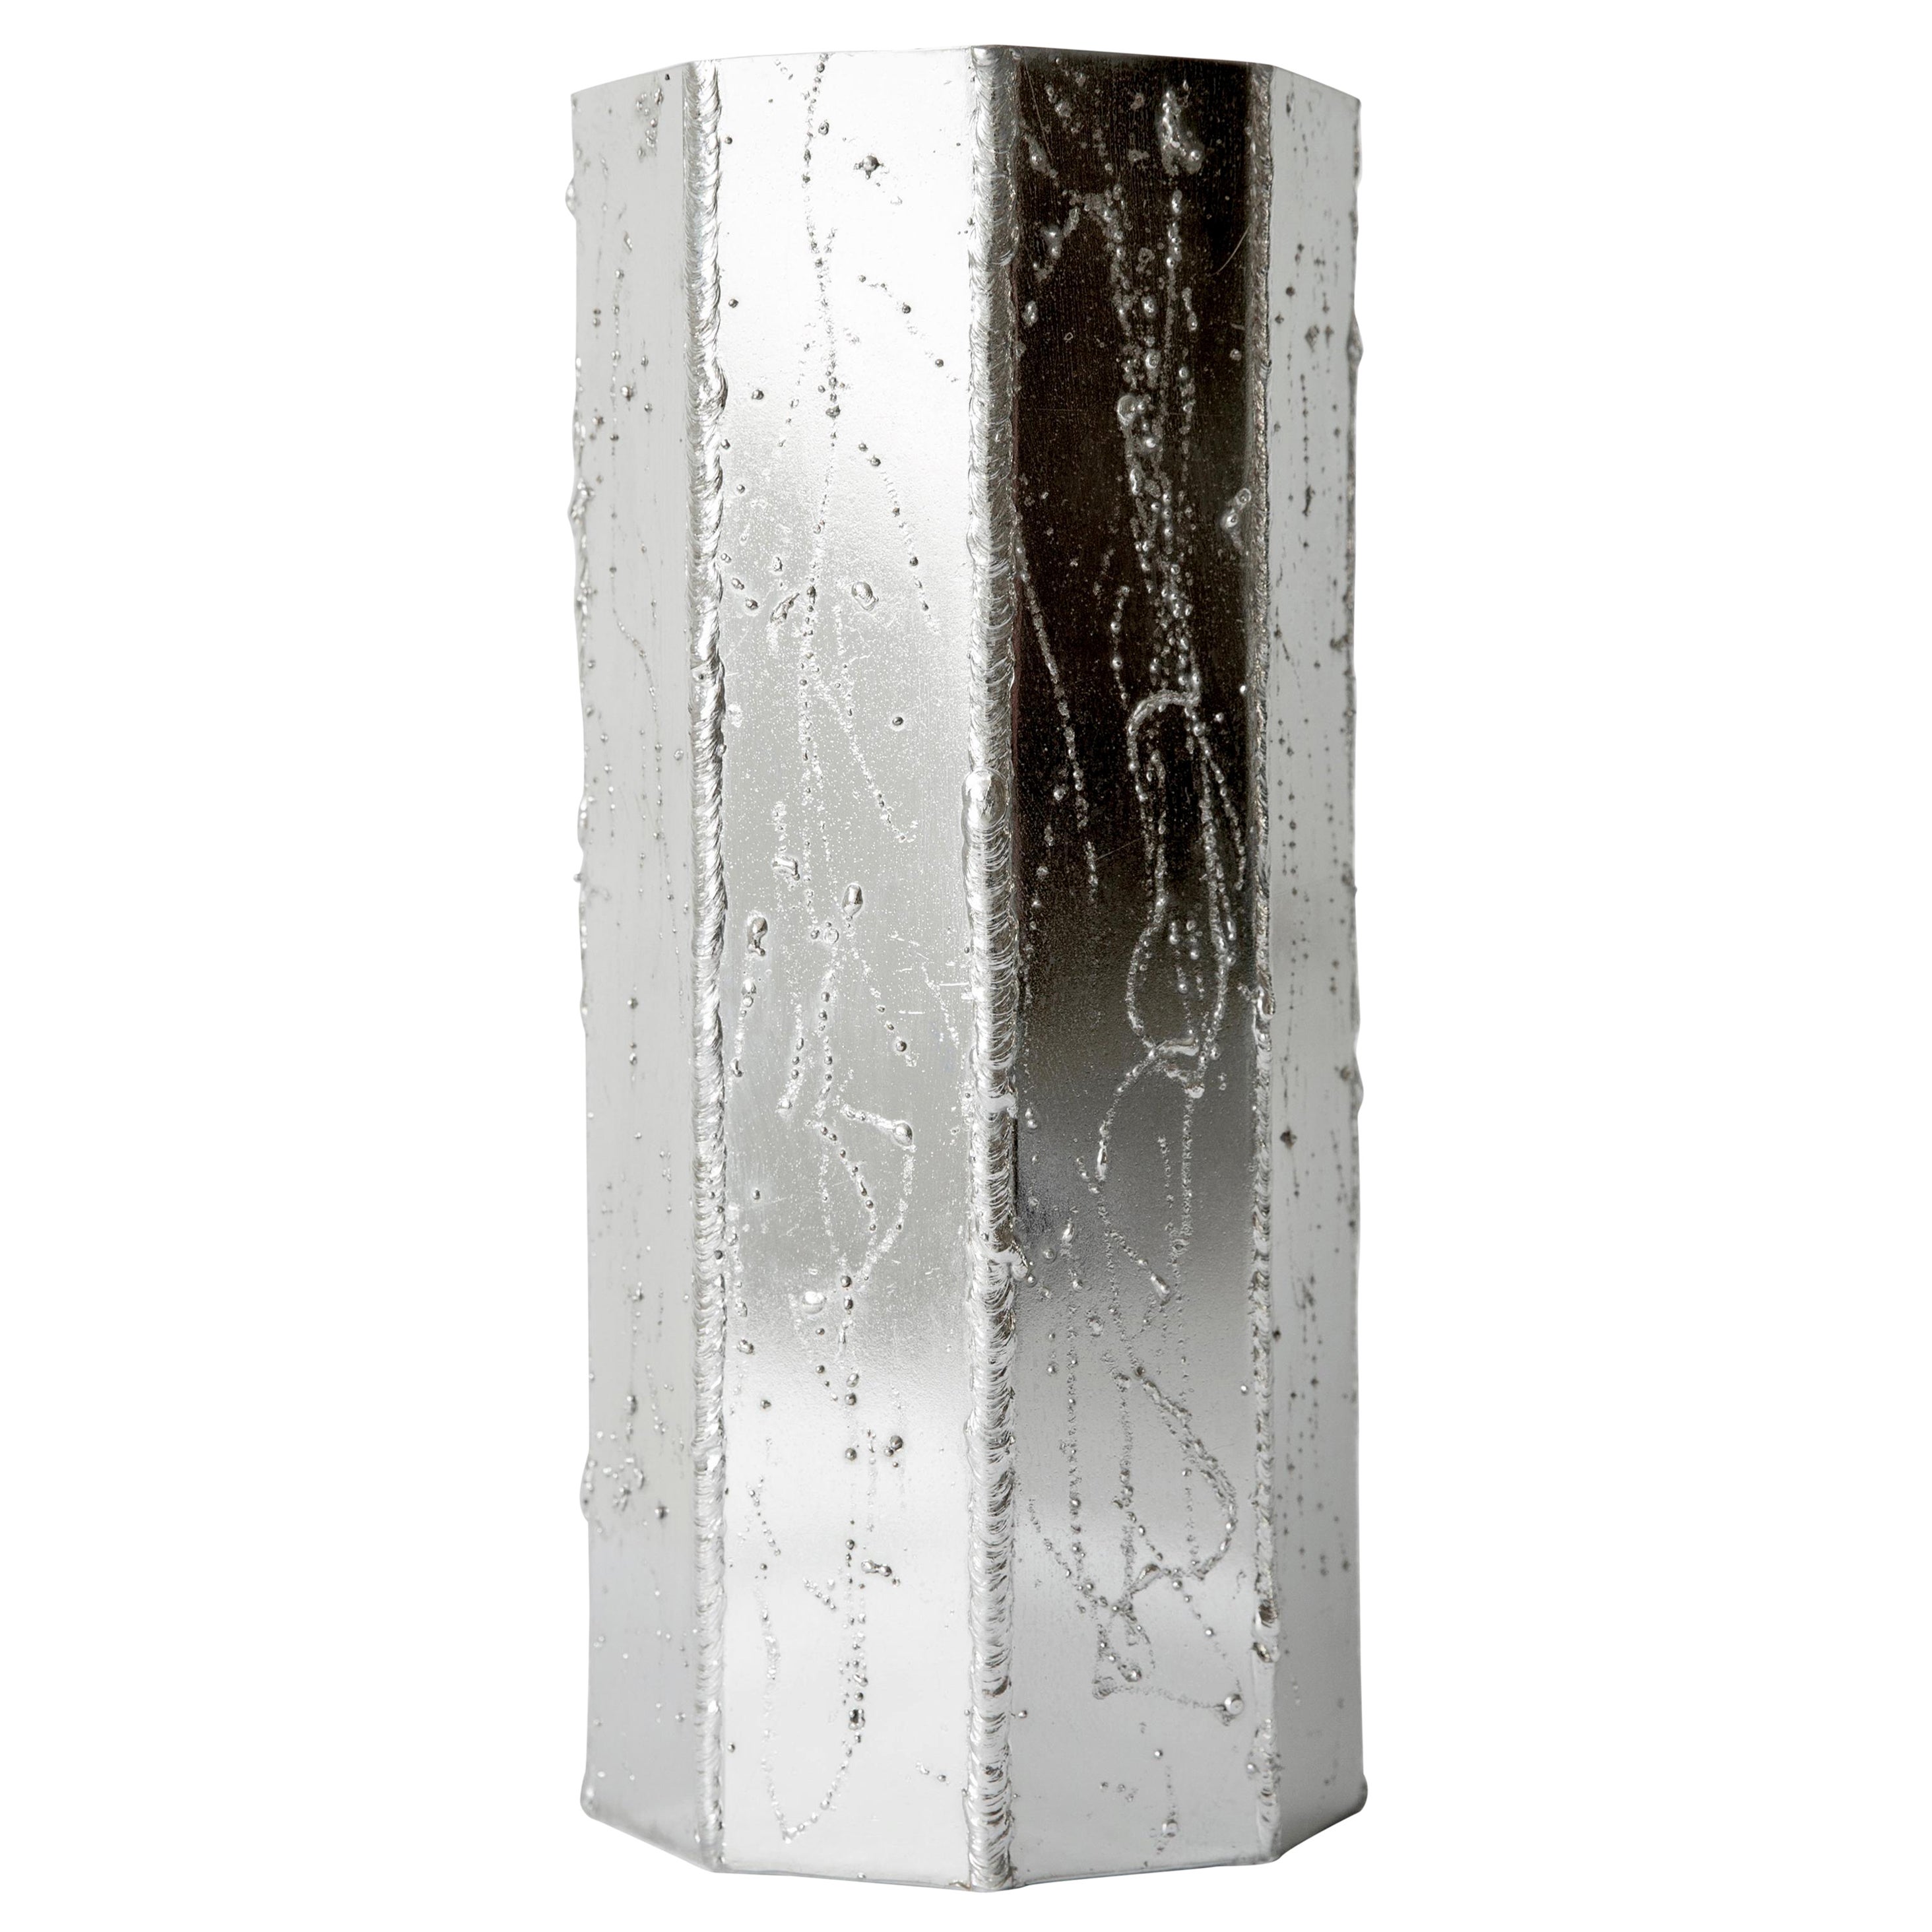 Chrome-Plated Metal Vase by Disciplina Studio For Sale